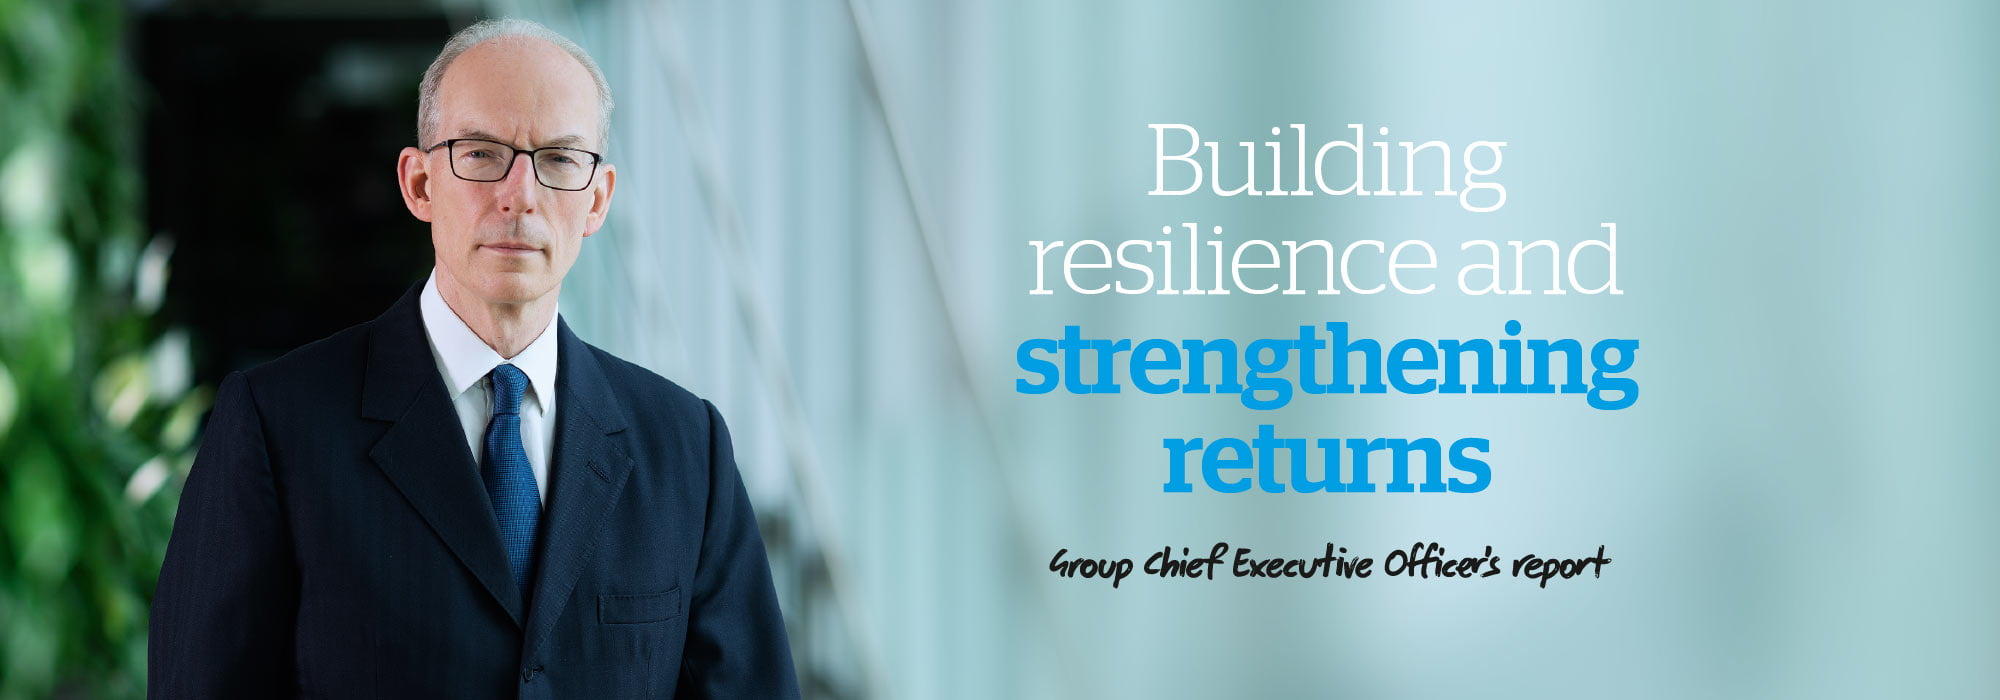 Andrew Horton - Group Chief Executive Officer's report - Building resilience and strengthening returns